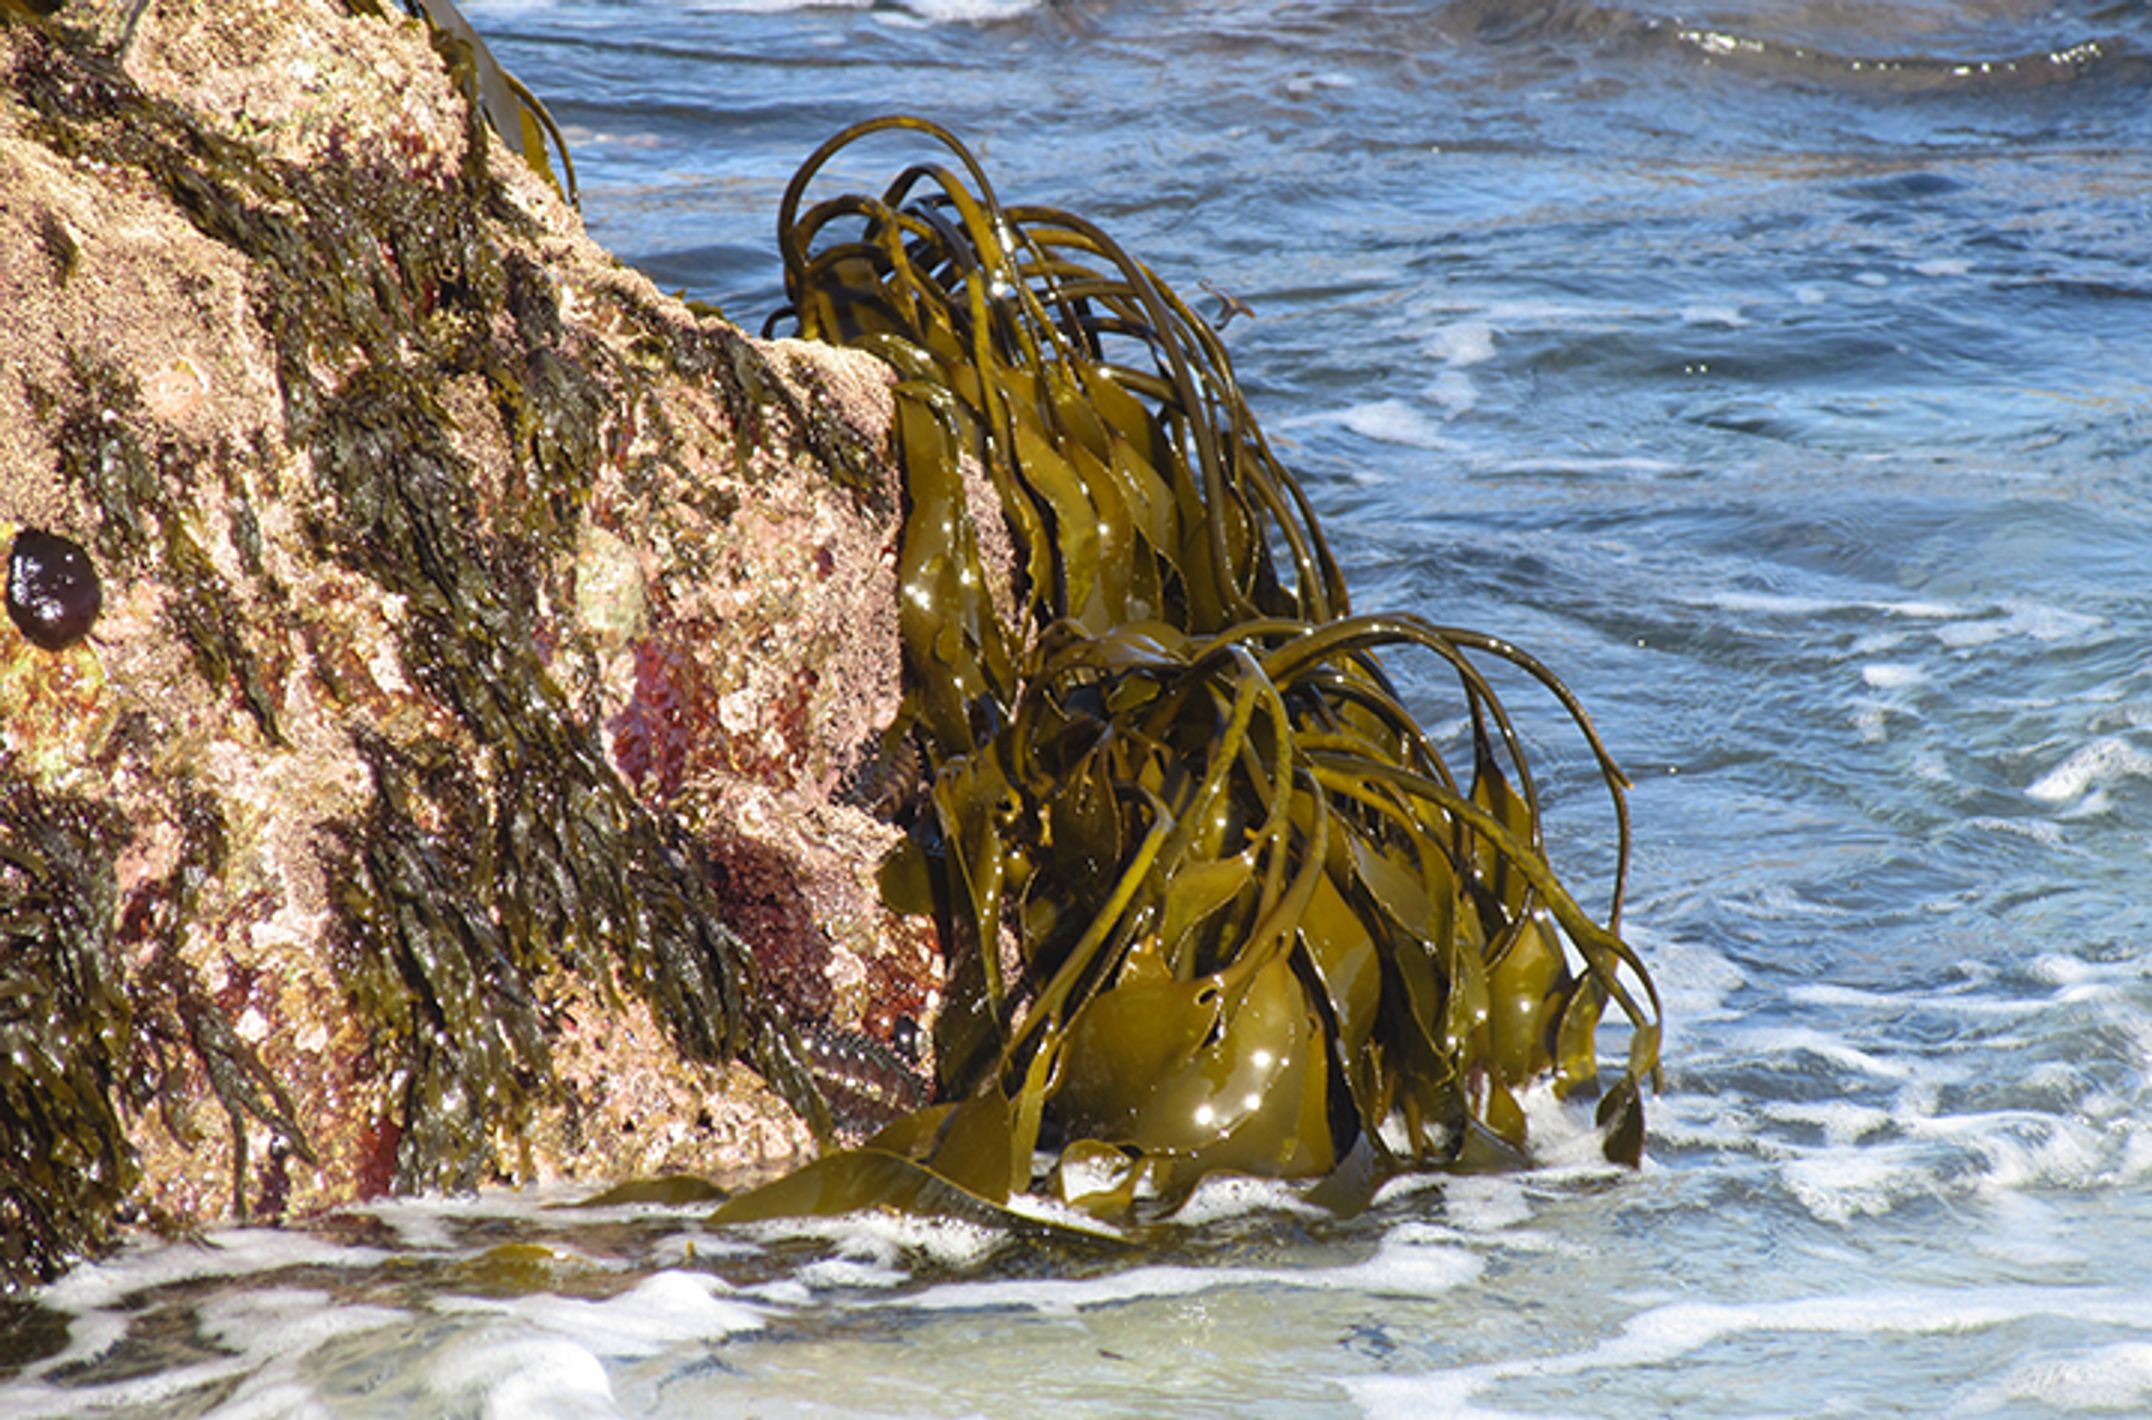 Brown algae attached to rock and exposed at low tide